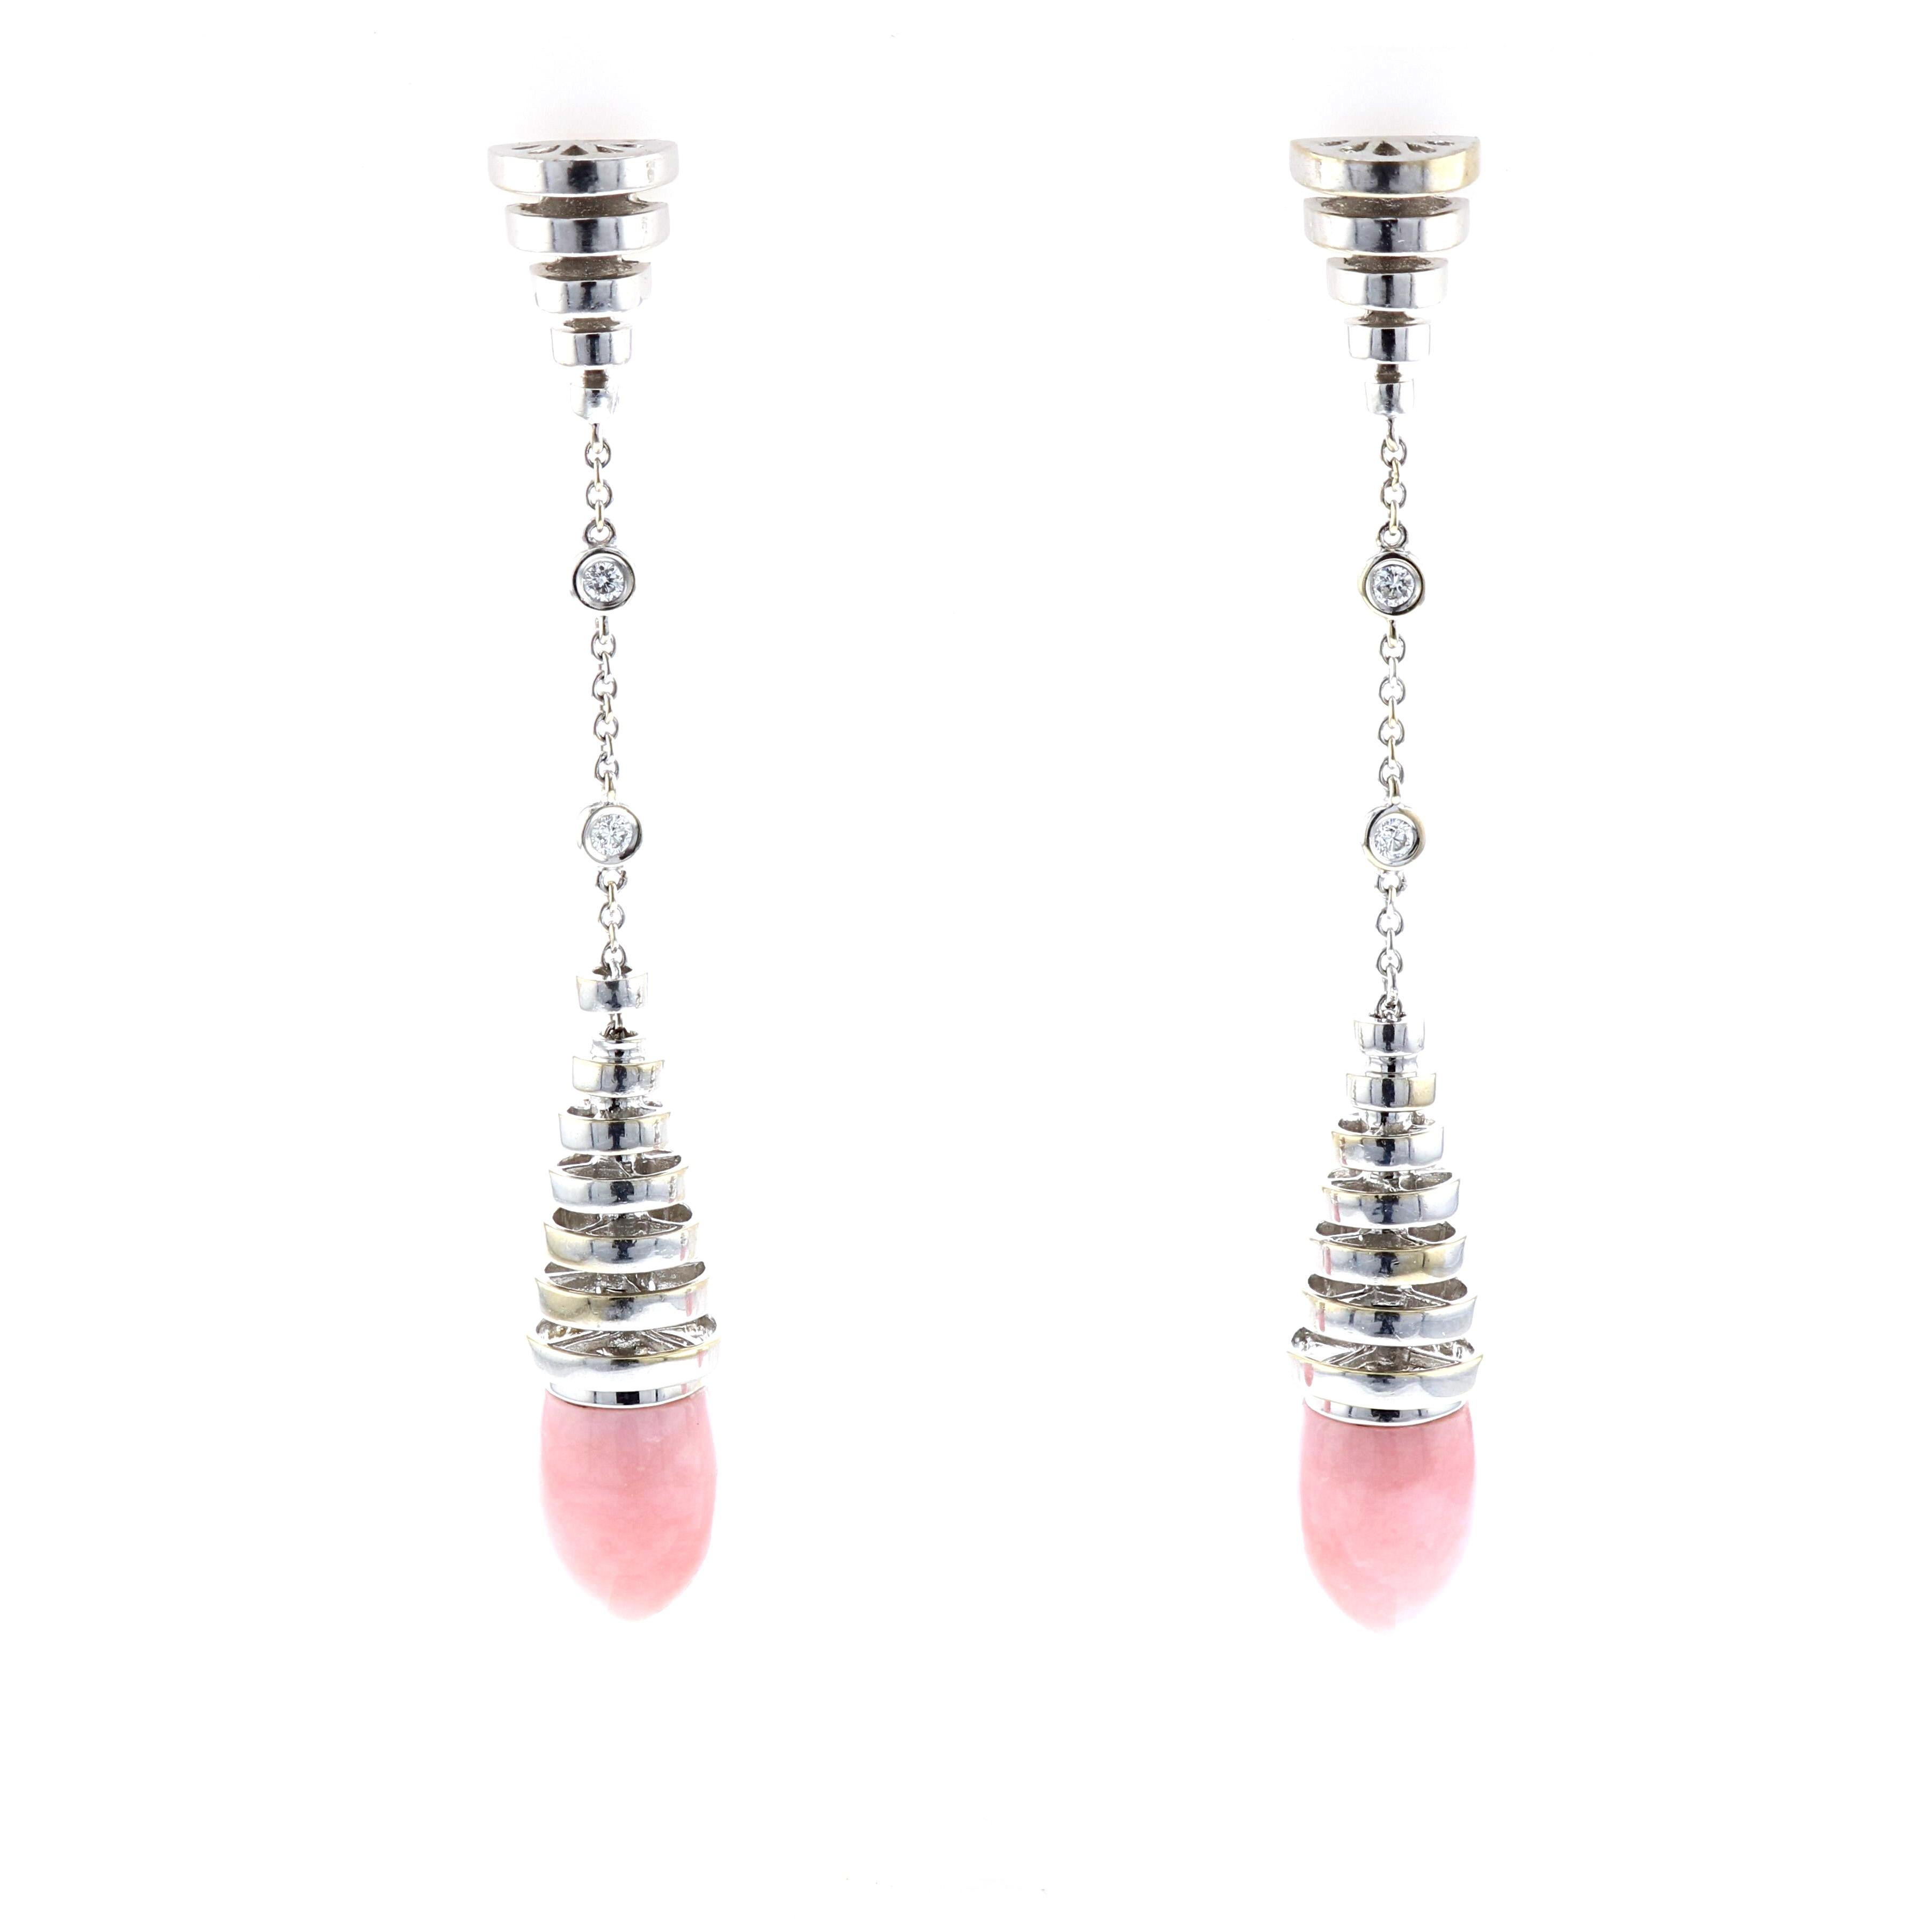 Cartier drop earrings in 18K white gold with diamonds and interchangeable onyx and rose quartz drops.  The four round diamonds total 0.20 carats; F-G color and VVS-VS clarity.  Earrings measure 3 1/4 inches long and 3/8 inches at the widest point. 